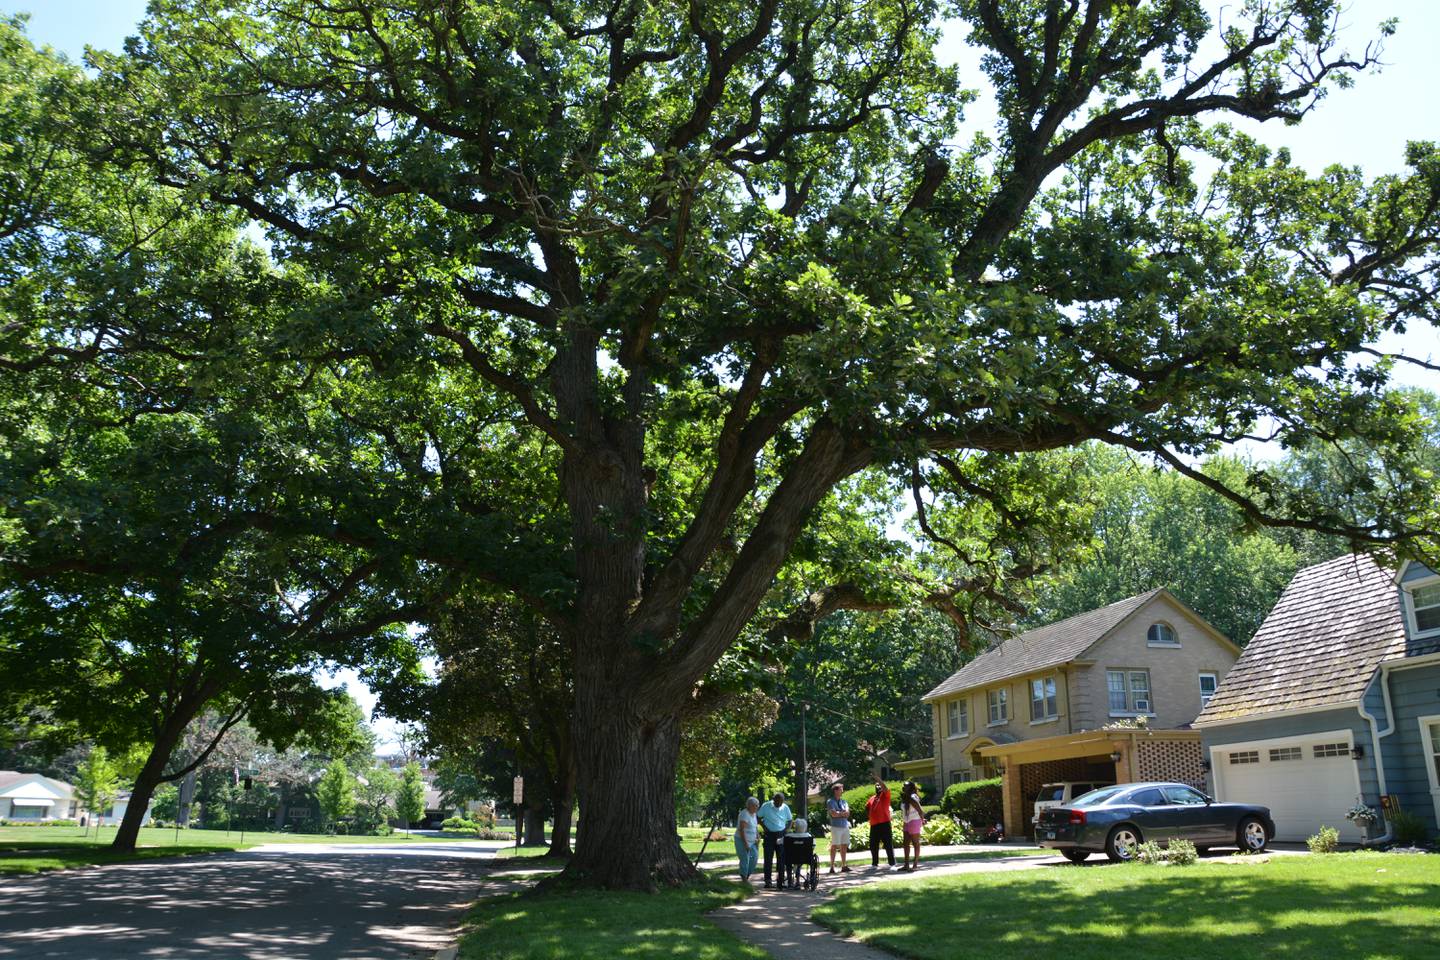 The Bennett admiring the historic oak tree one last time on Monday, July 18.